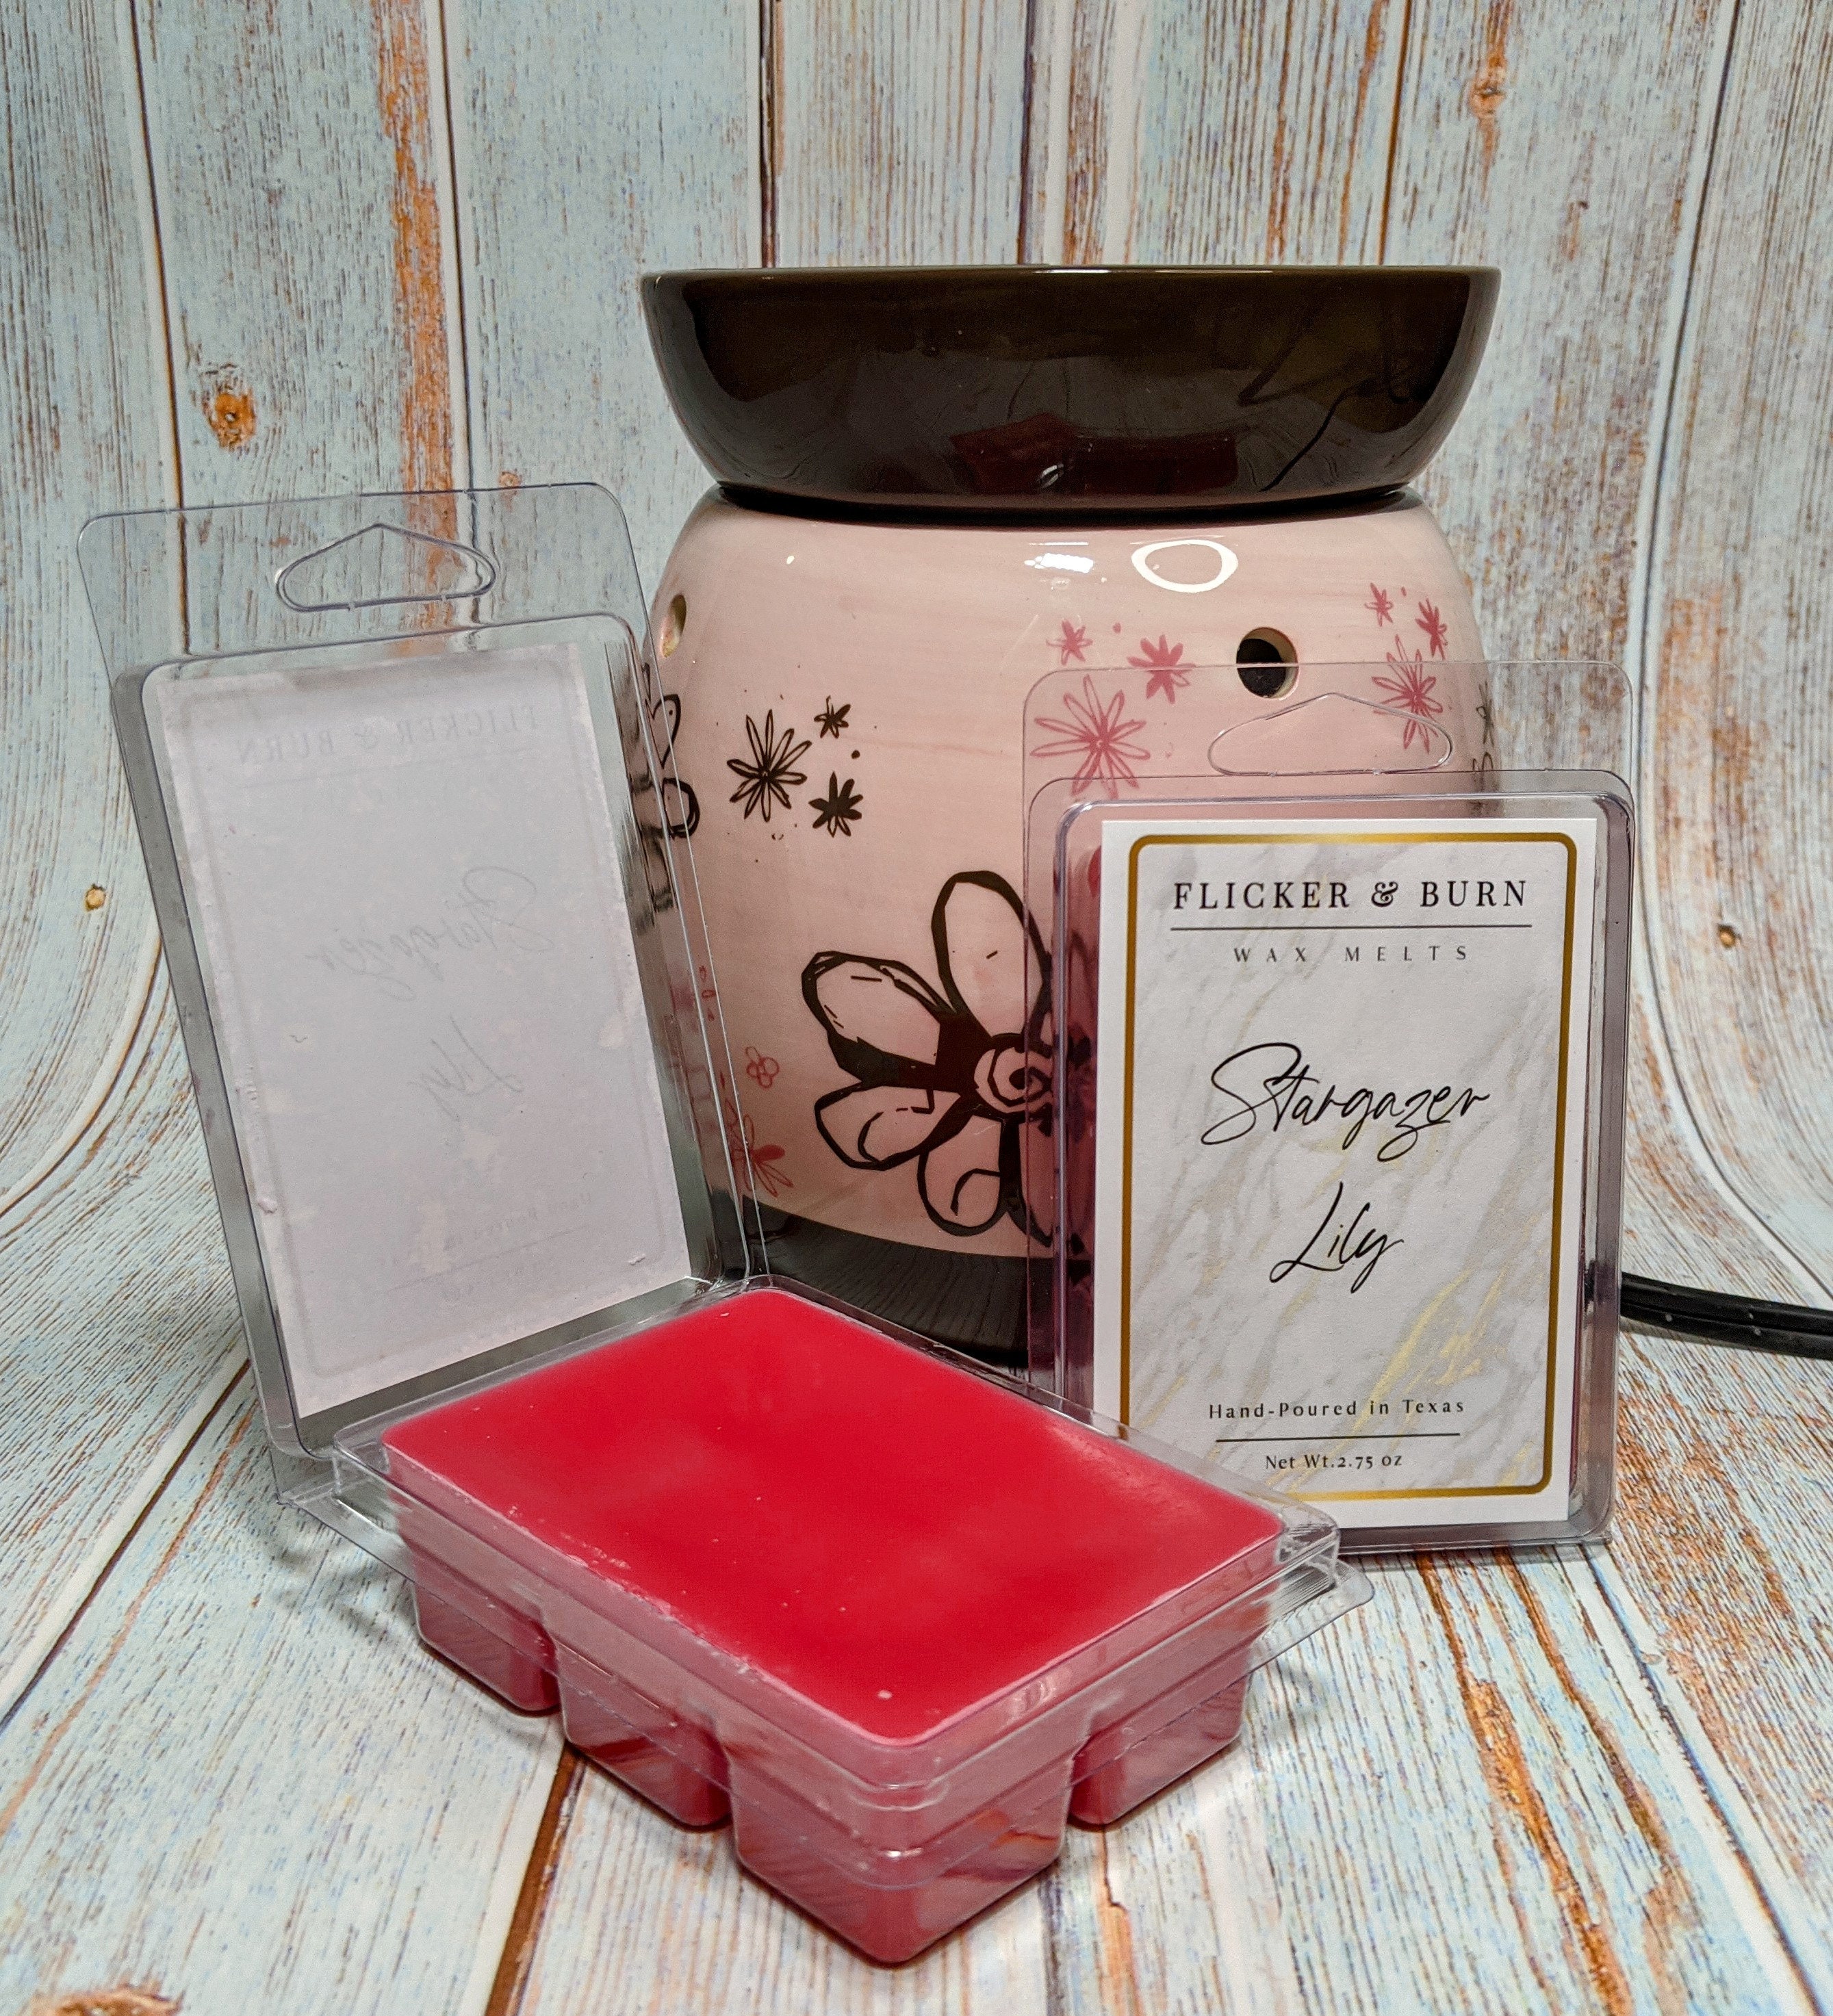 Candle Warmers Soy Wax Melts, Cherry Blossom, Sweet Pea/Lilies/Strawberry